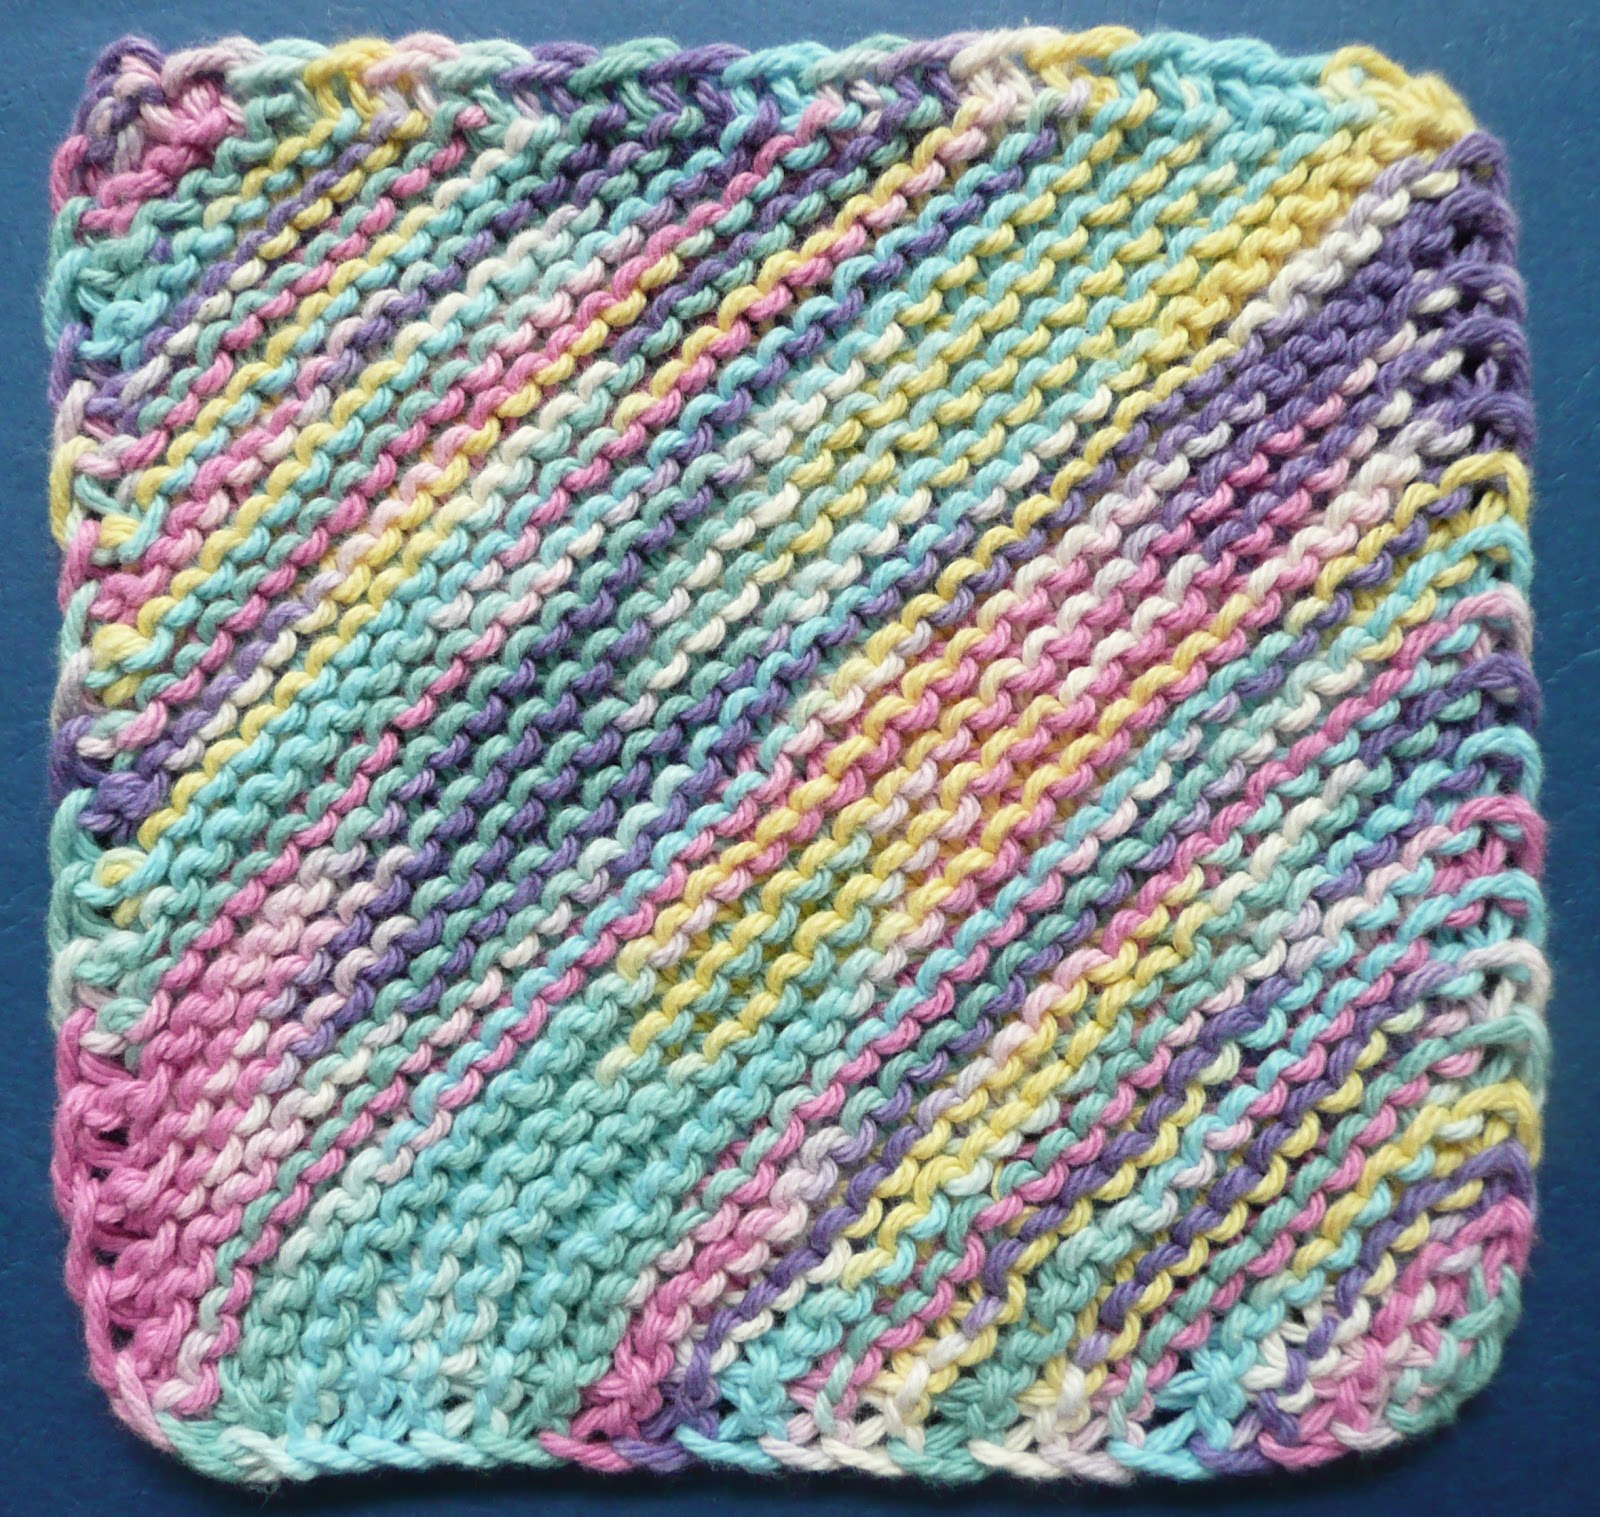 Cotton Dishcloths Knitting Patterns Perfect One Ounce Dishcloth Free Patterns